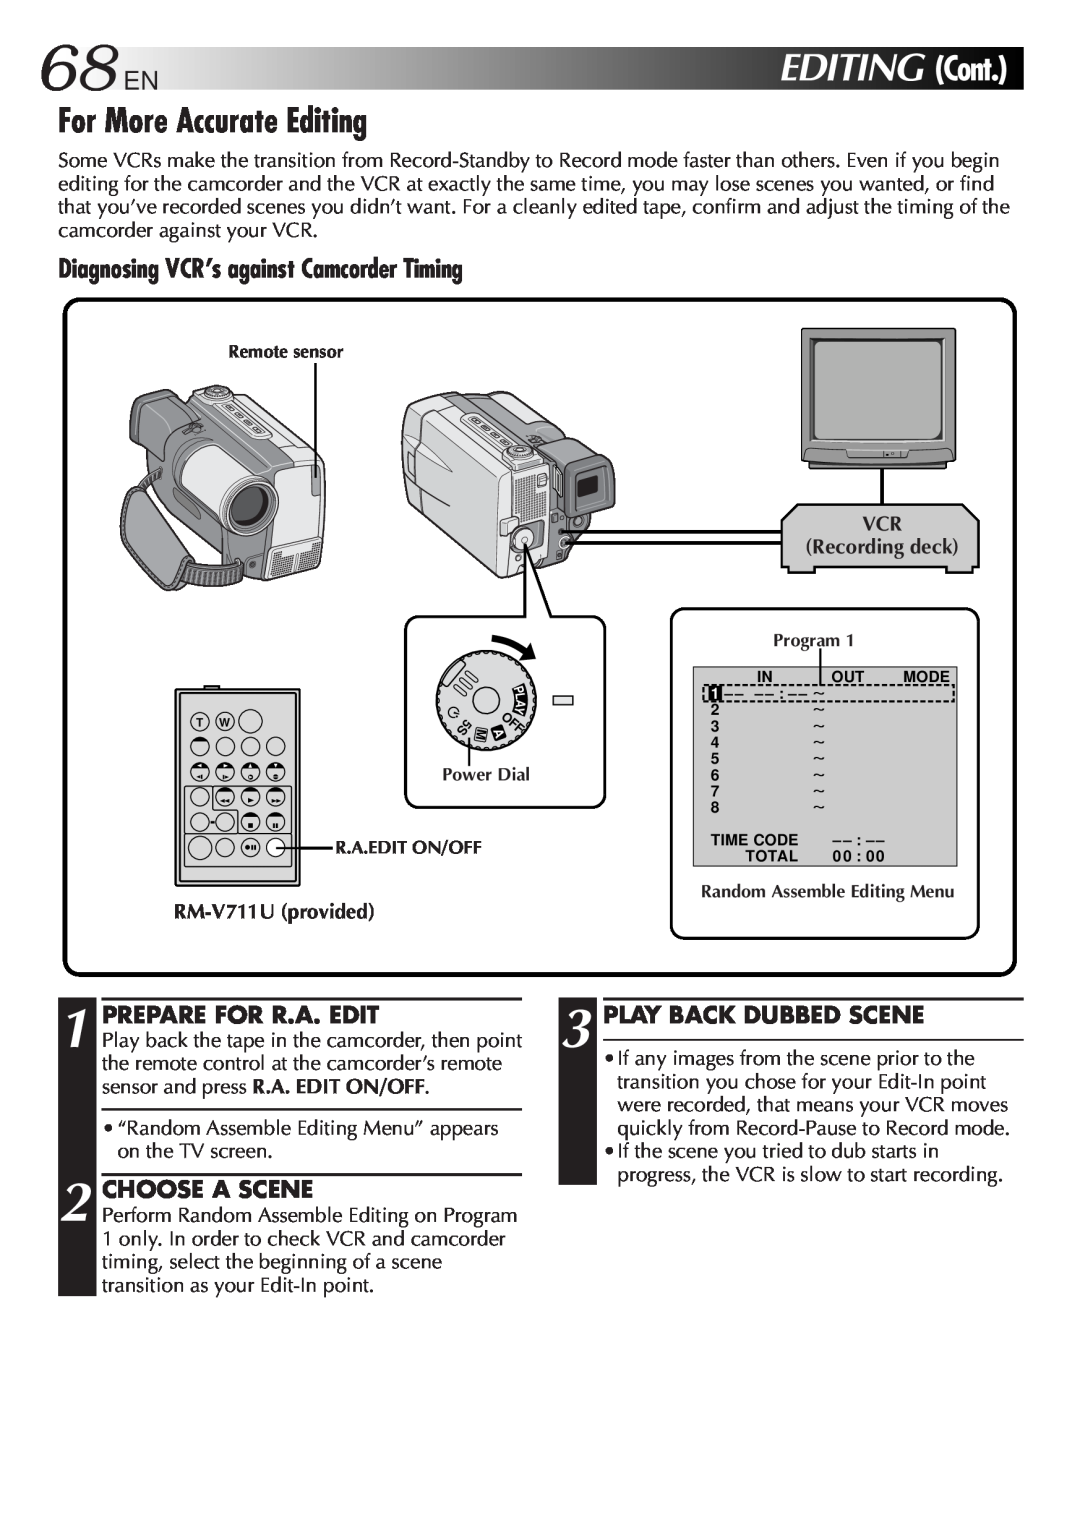 JVC GR-DVL9000 manual 68ENEDITINGCont, For More Accurate Editing, Diagnosing VCR’s against Camcorder Timing, Choose A Scene 